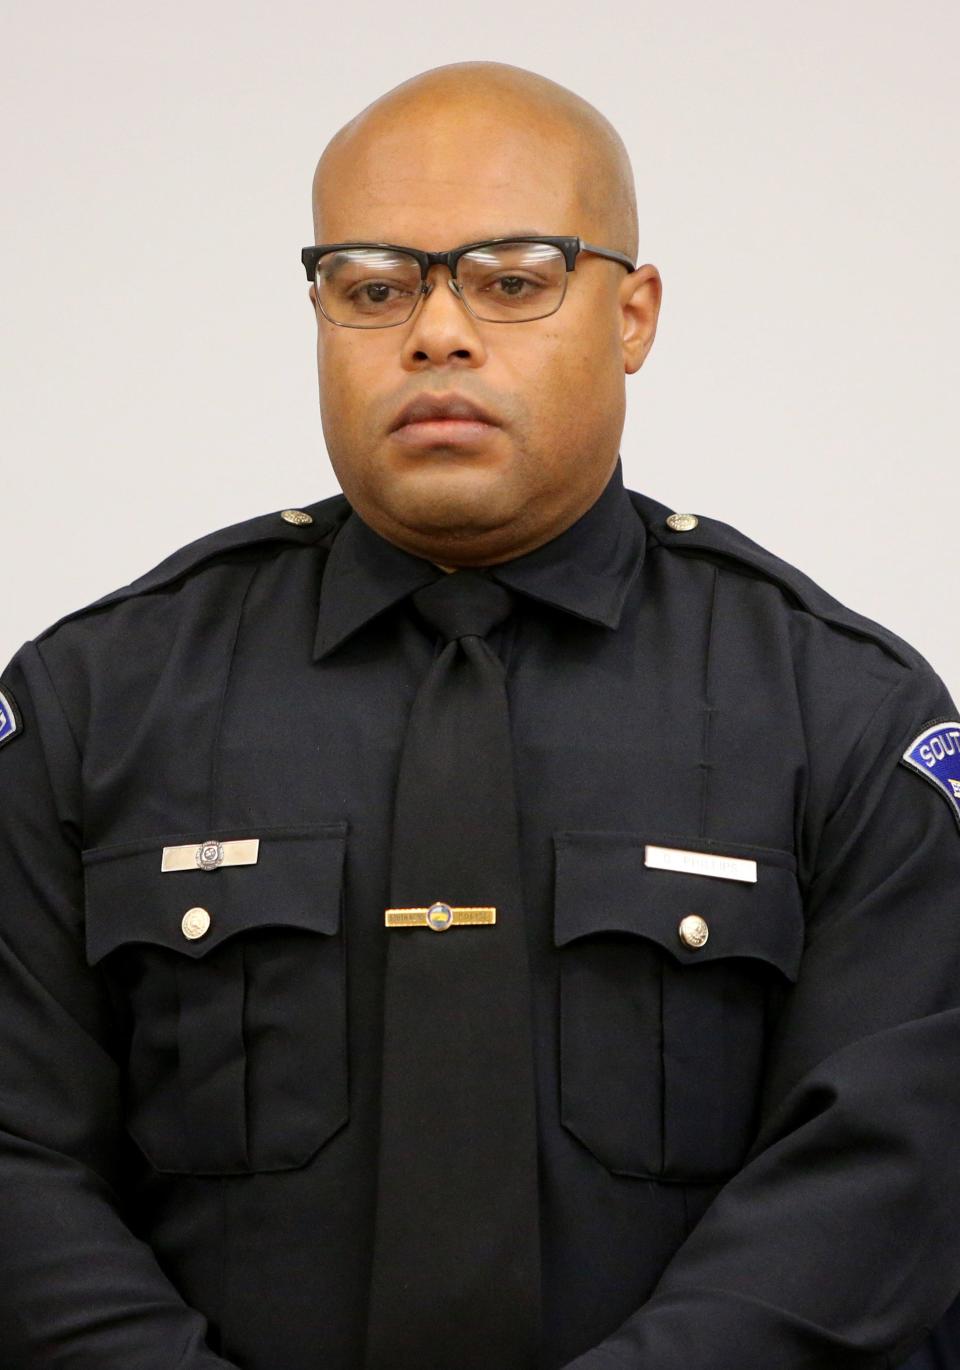 South Bend Police Officer Quentin Phillips